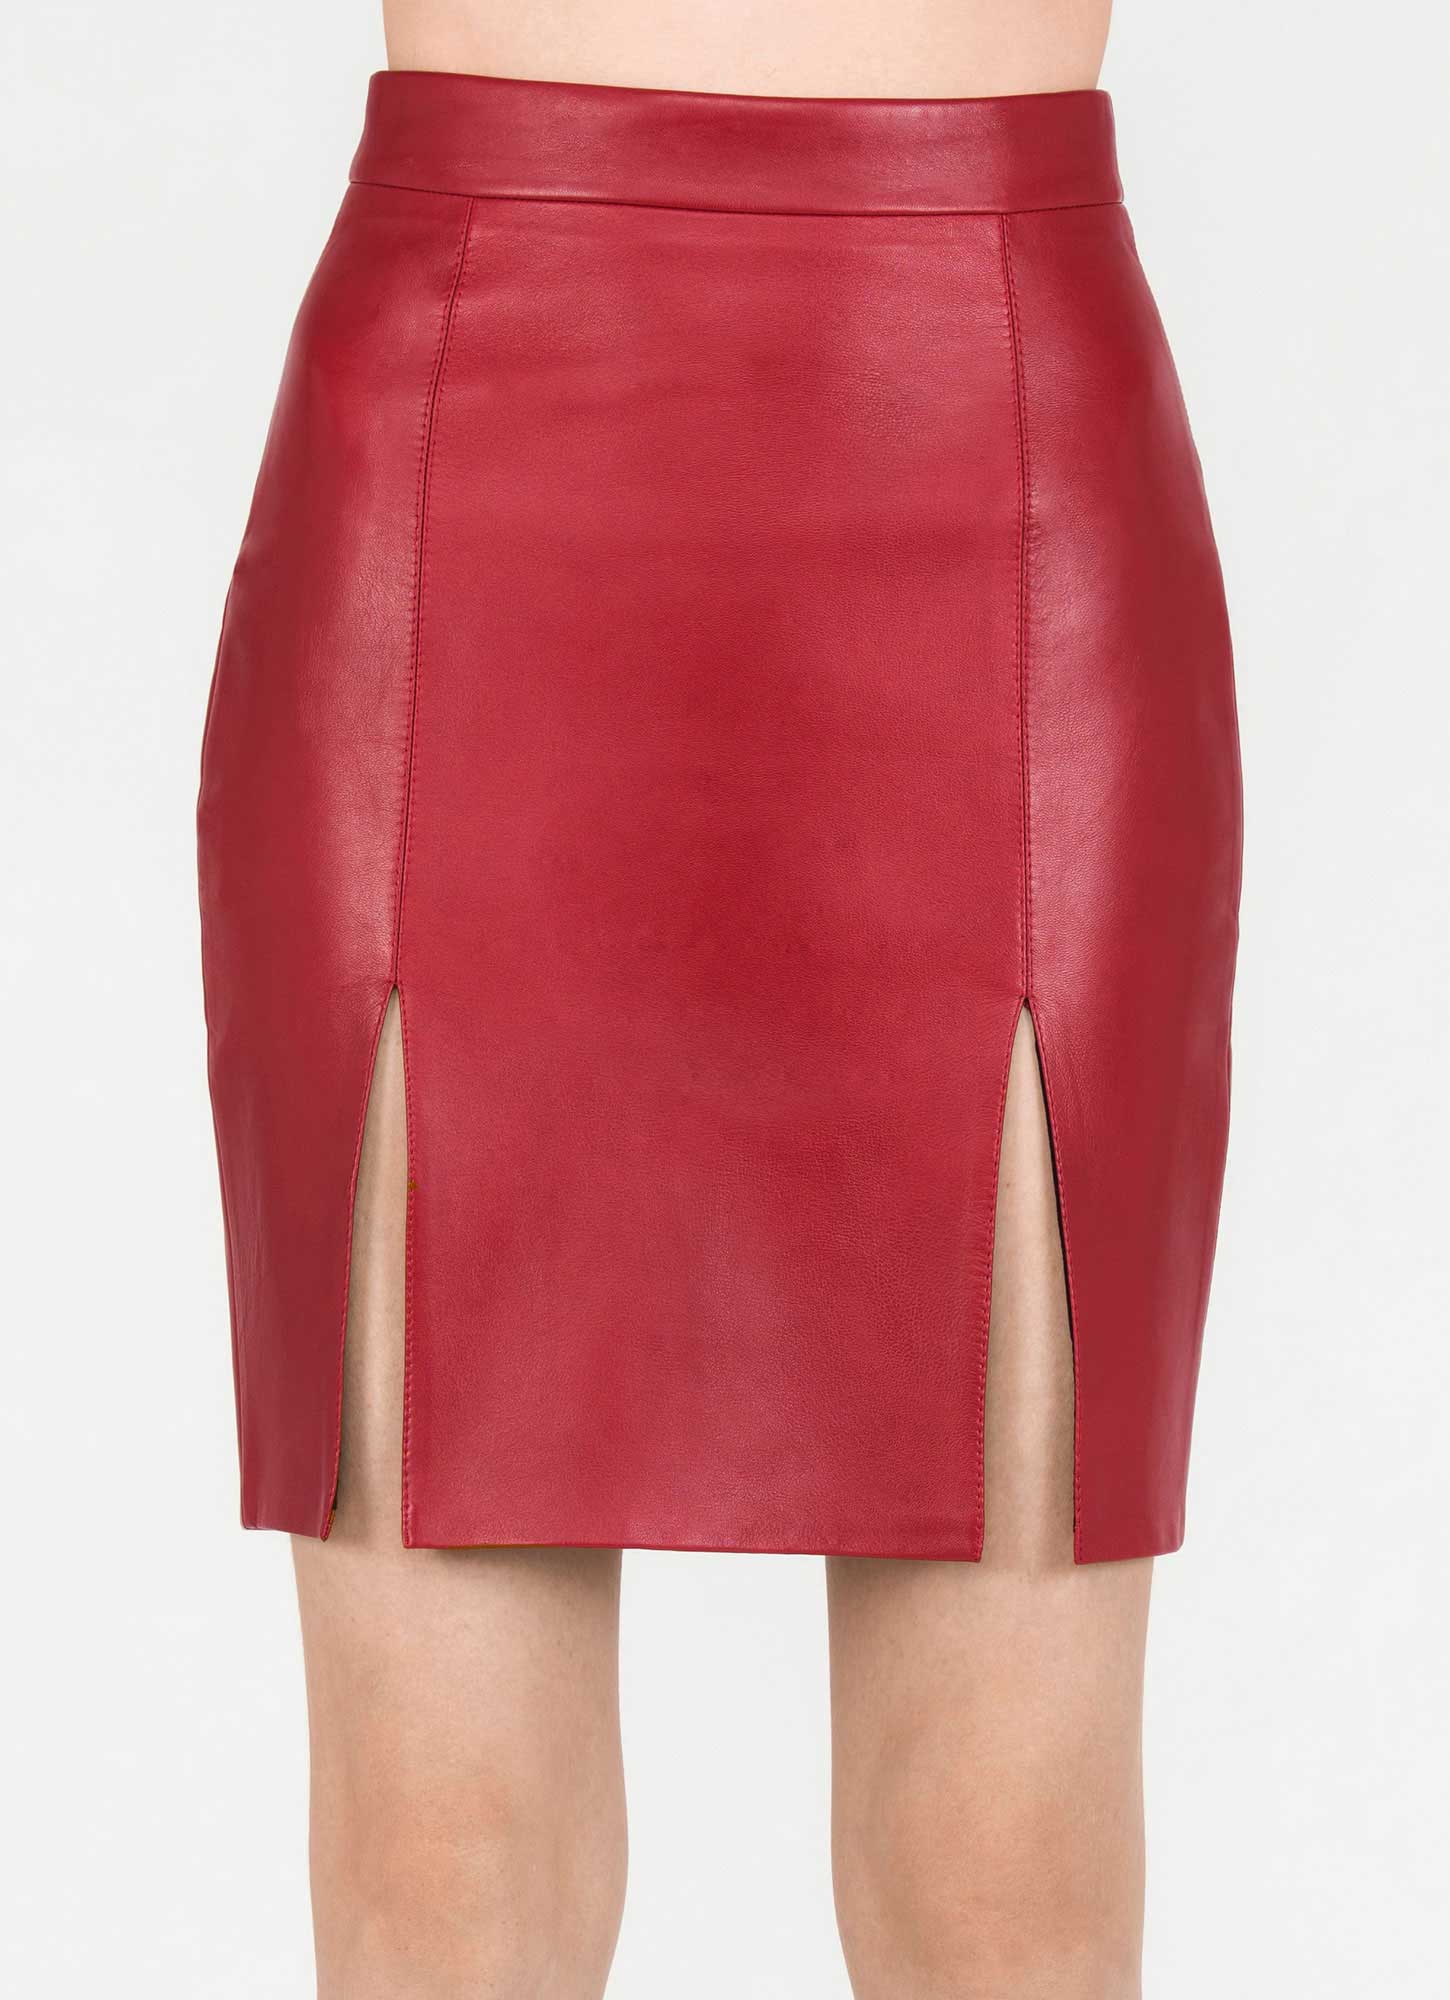 leather skirt with slit